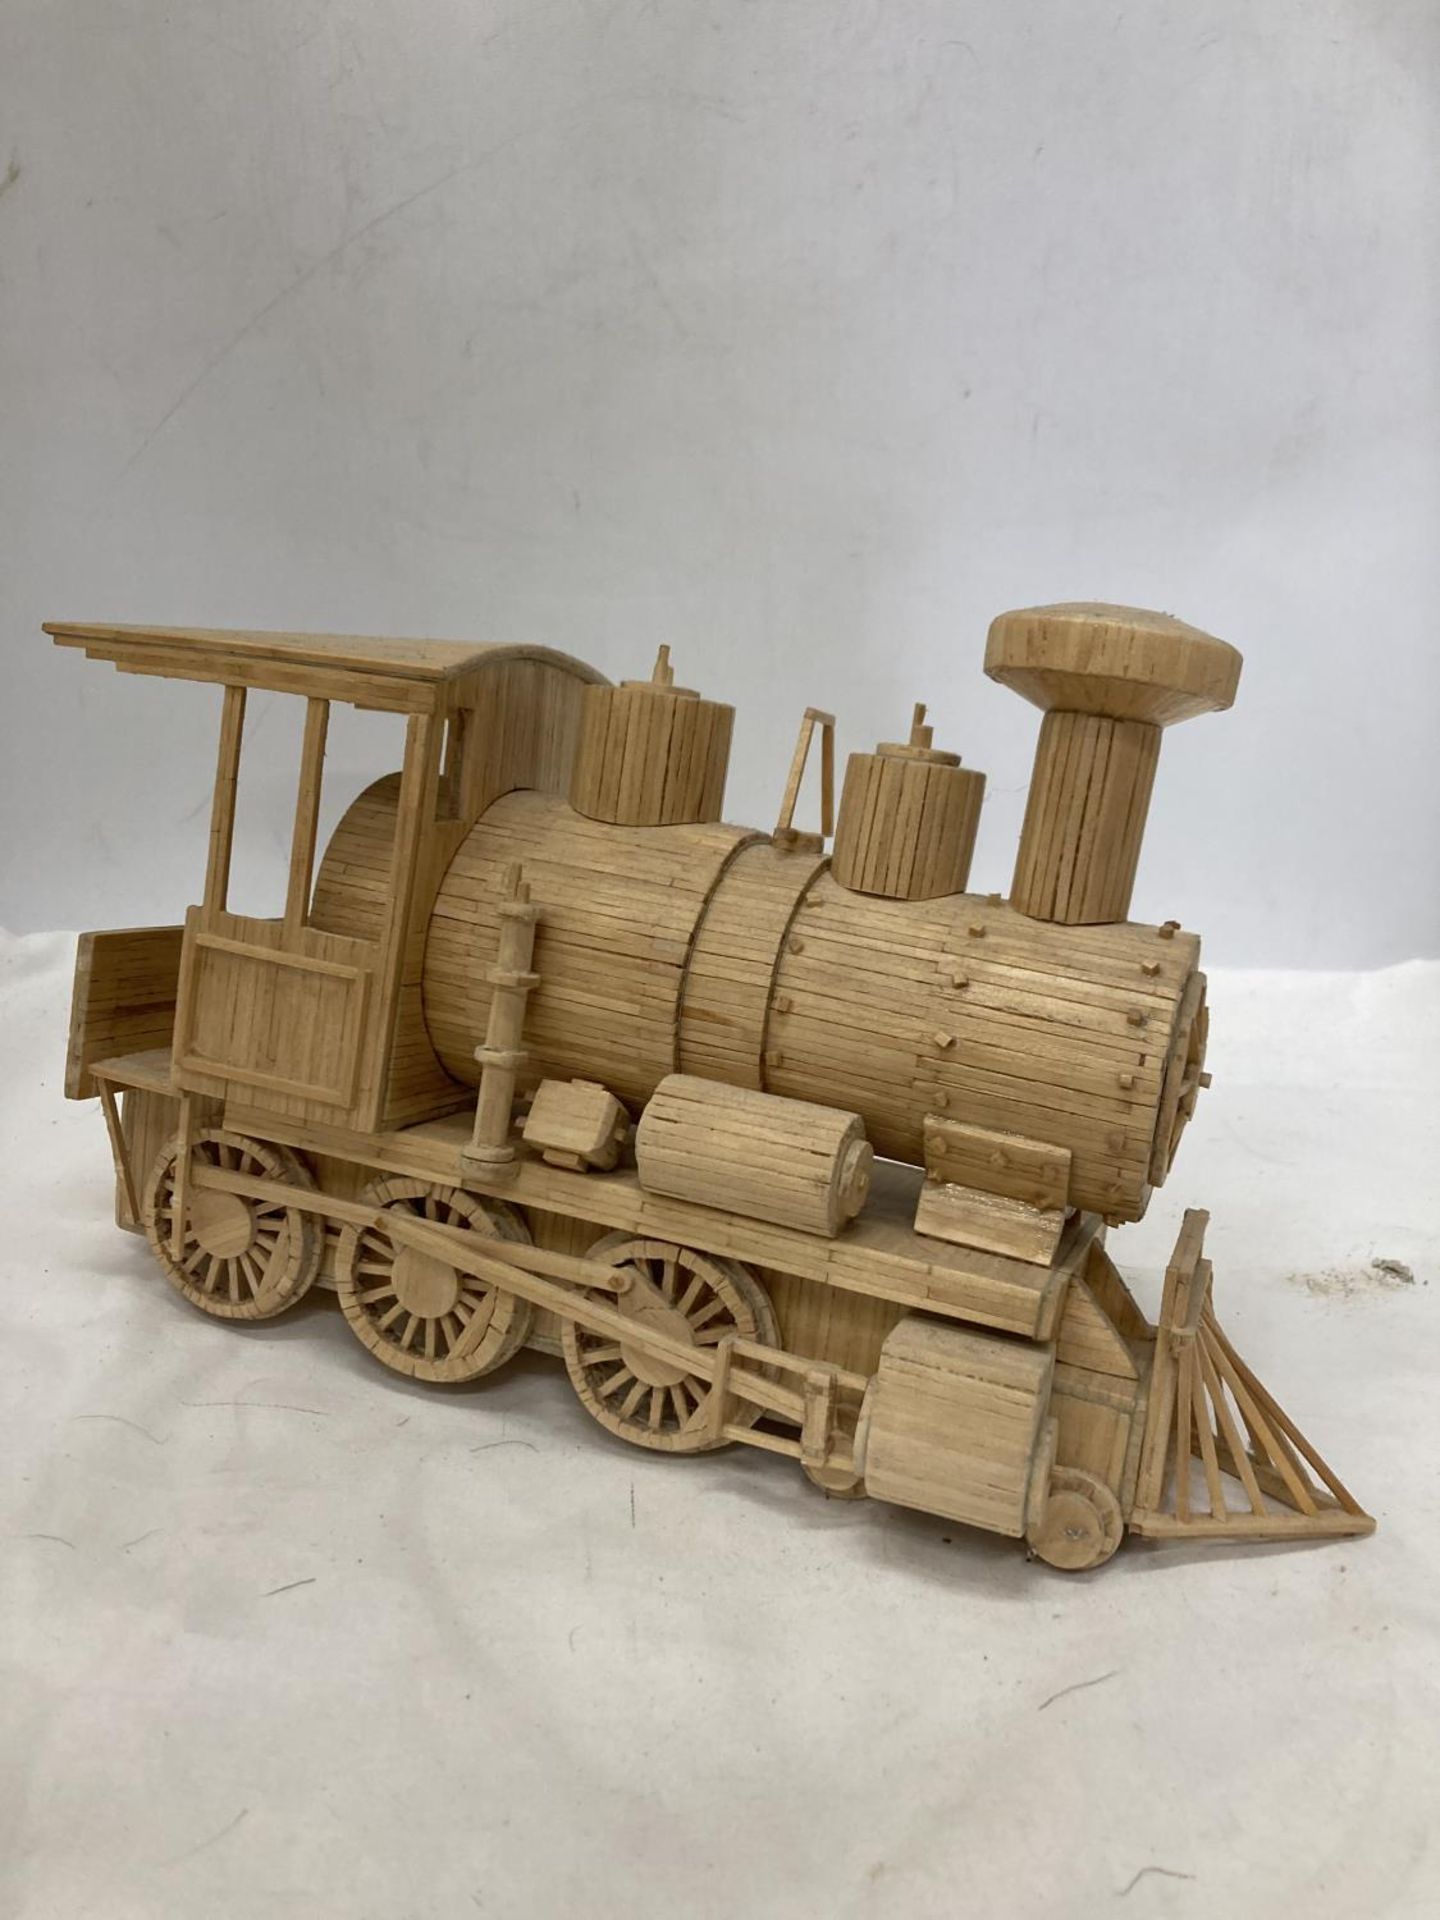 A QUANTITY OF MODELS MADE WITH WOOD AND MATCHSTICKS TO INCLUDE TRAINS, A TRAM, TRUCK, ETC - Image 2 of 7